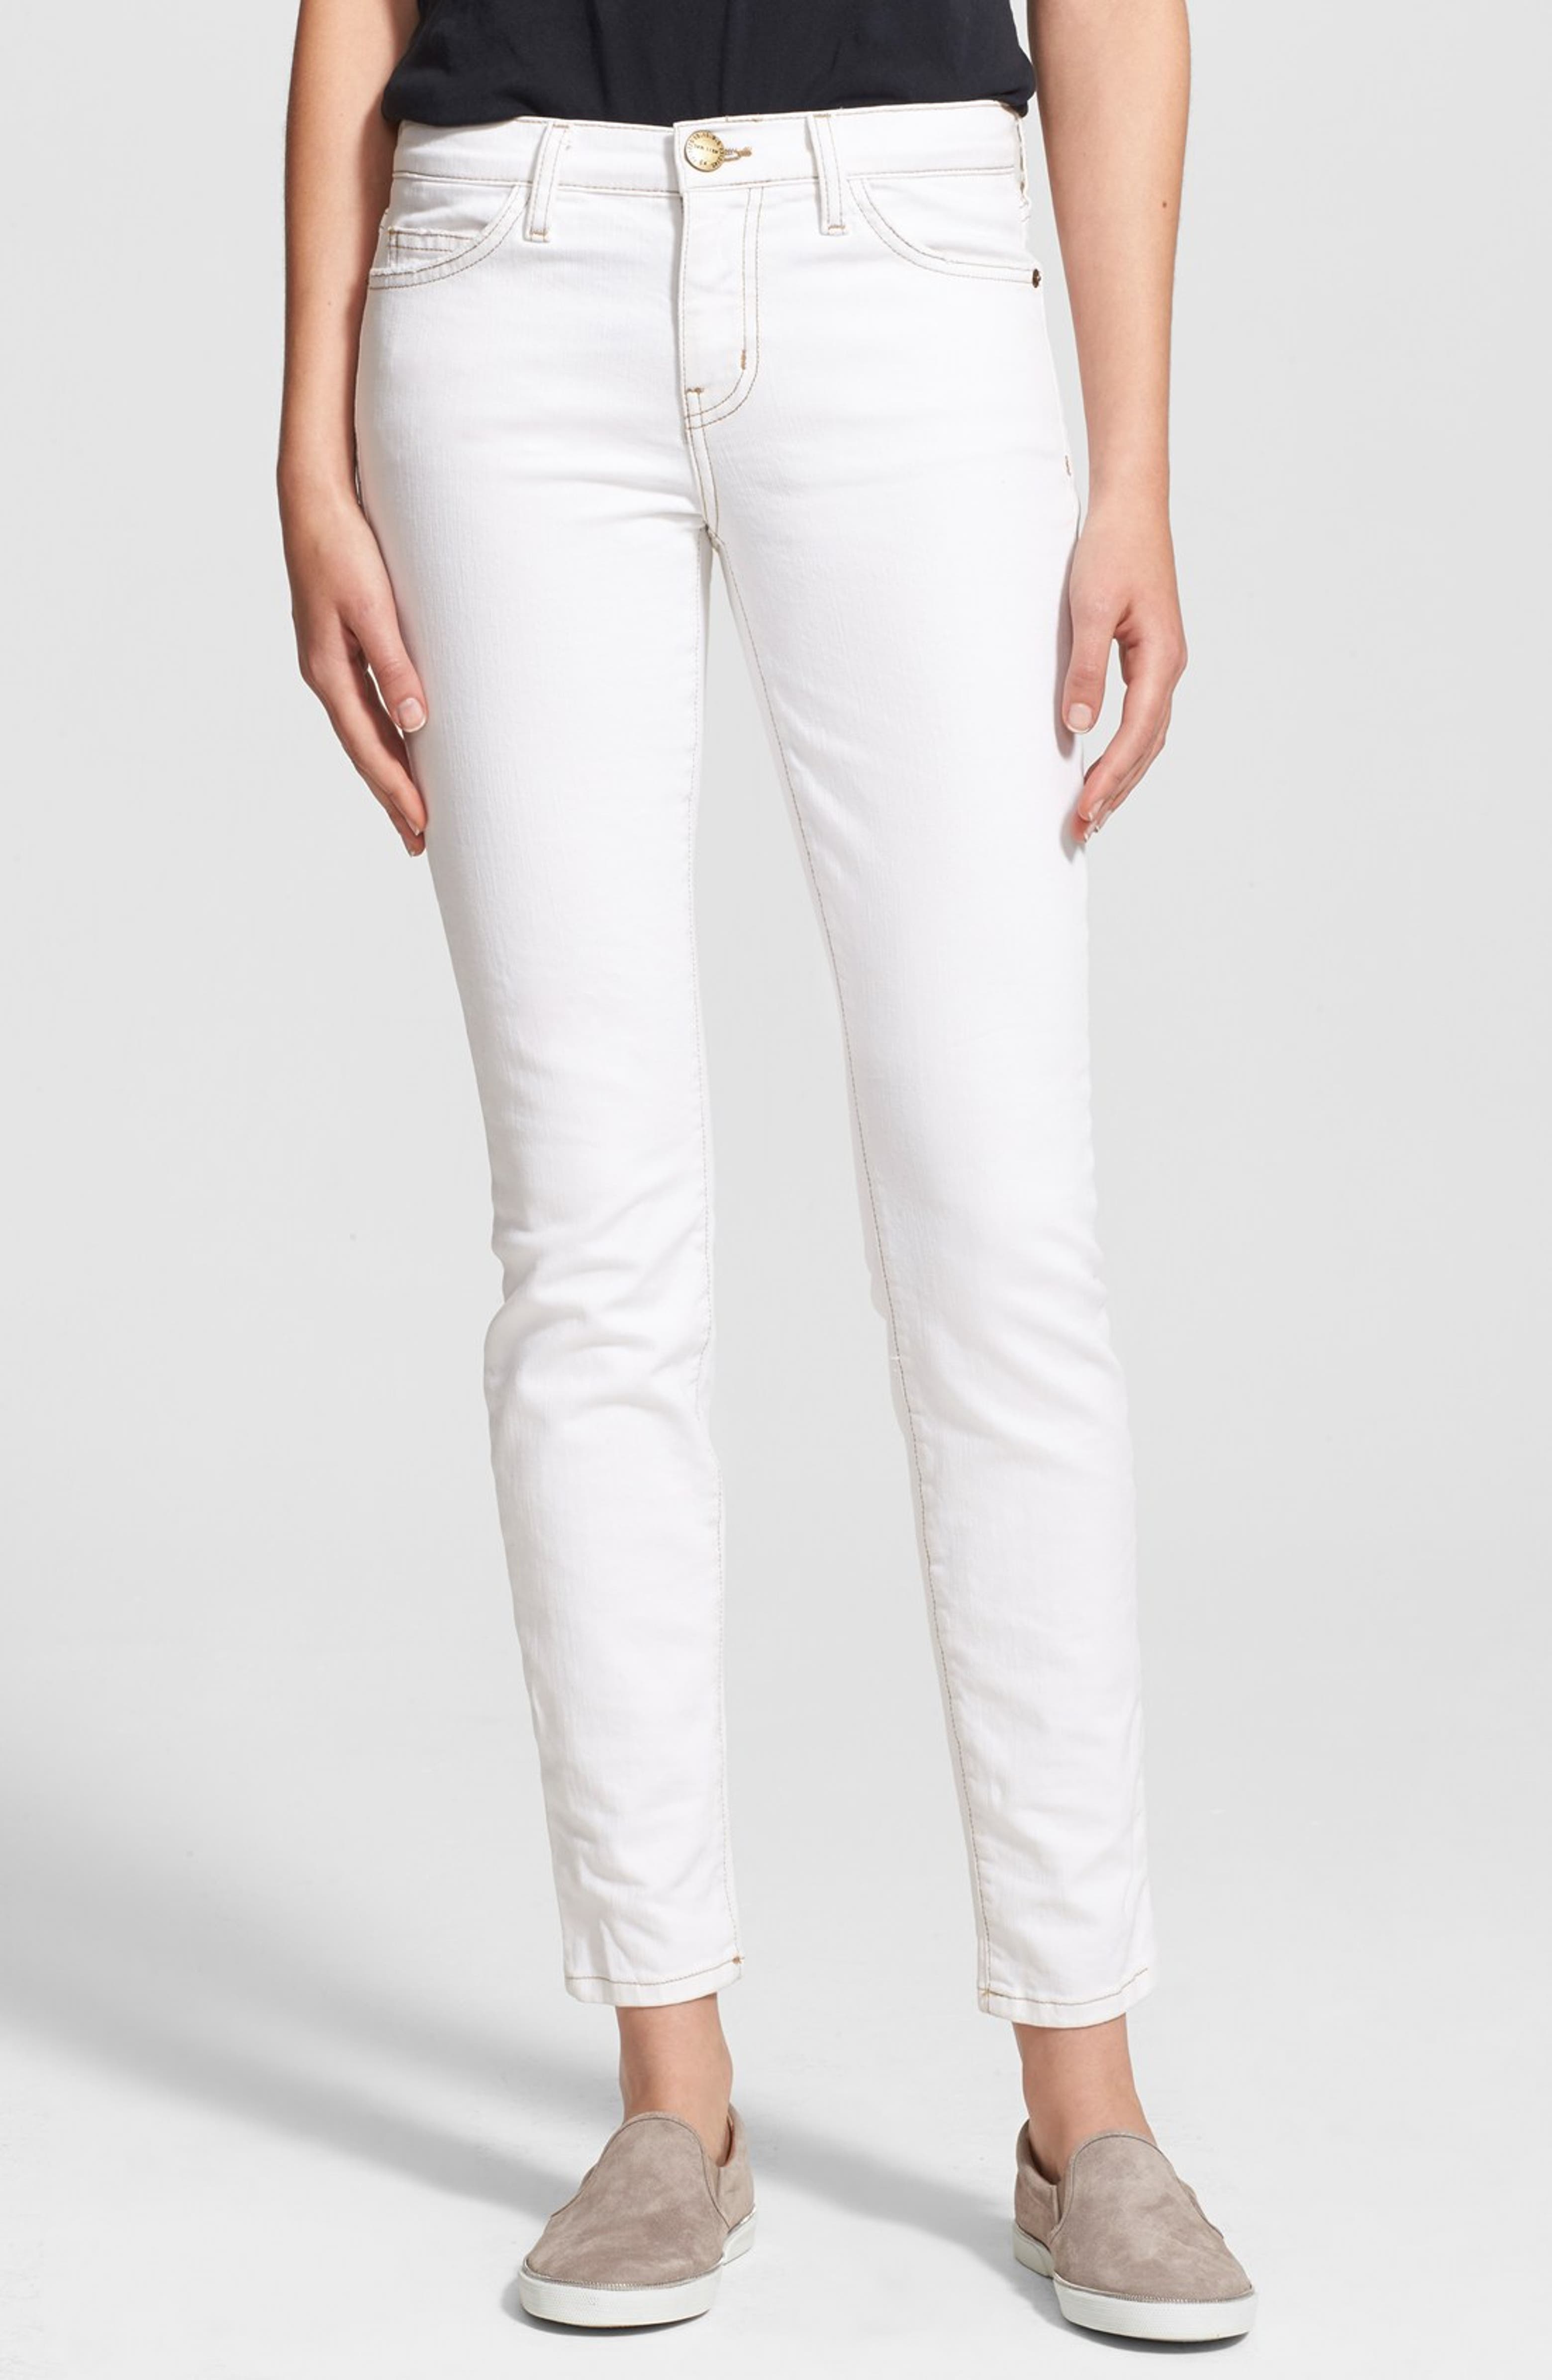 Current/Elliott 'The Ankle Skinny' Print Stretch Jeans | Nordstrom